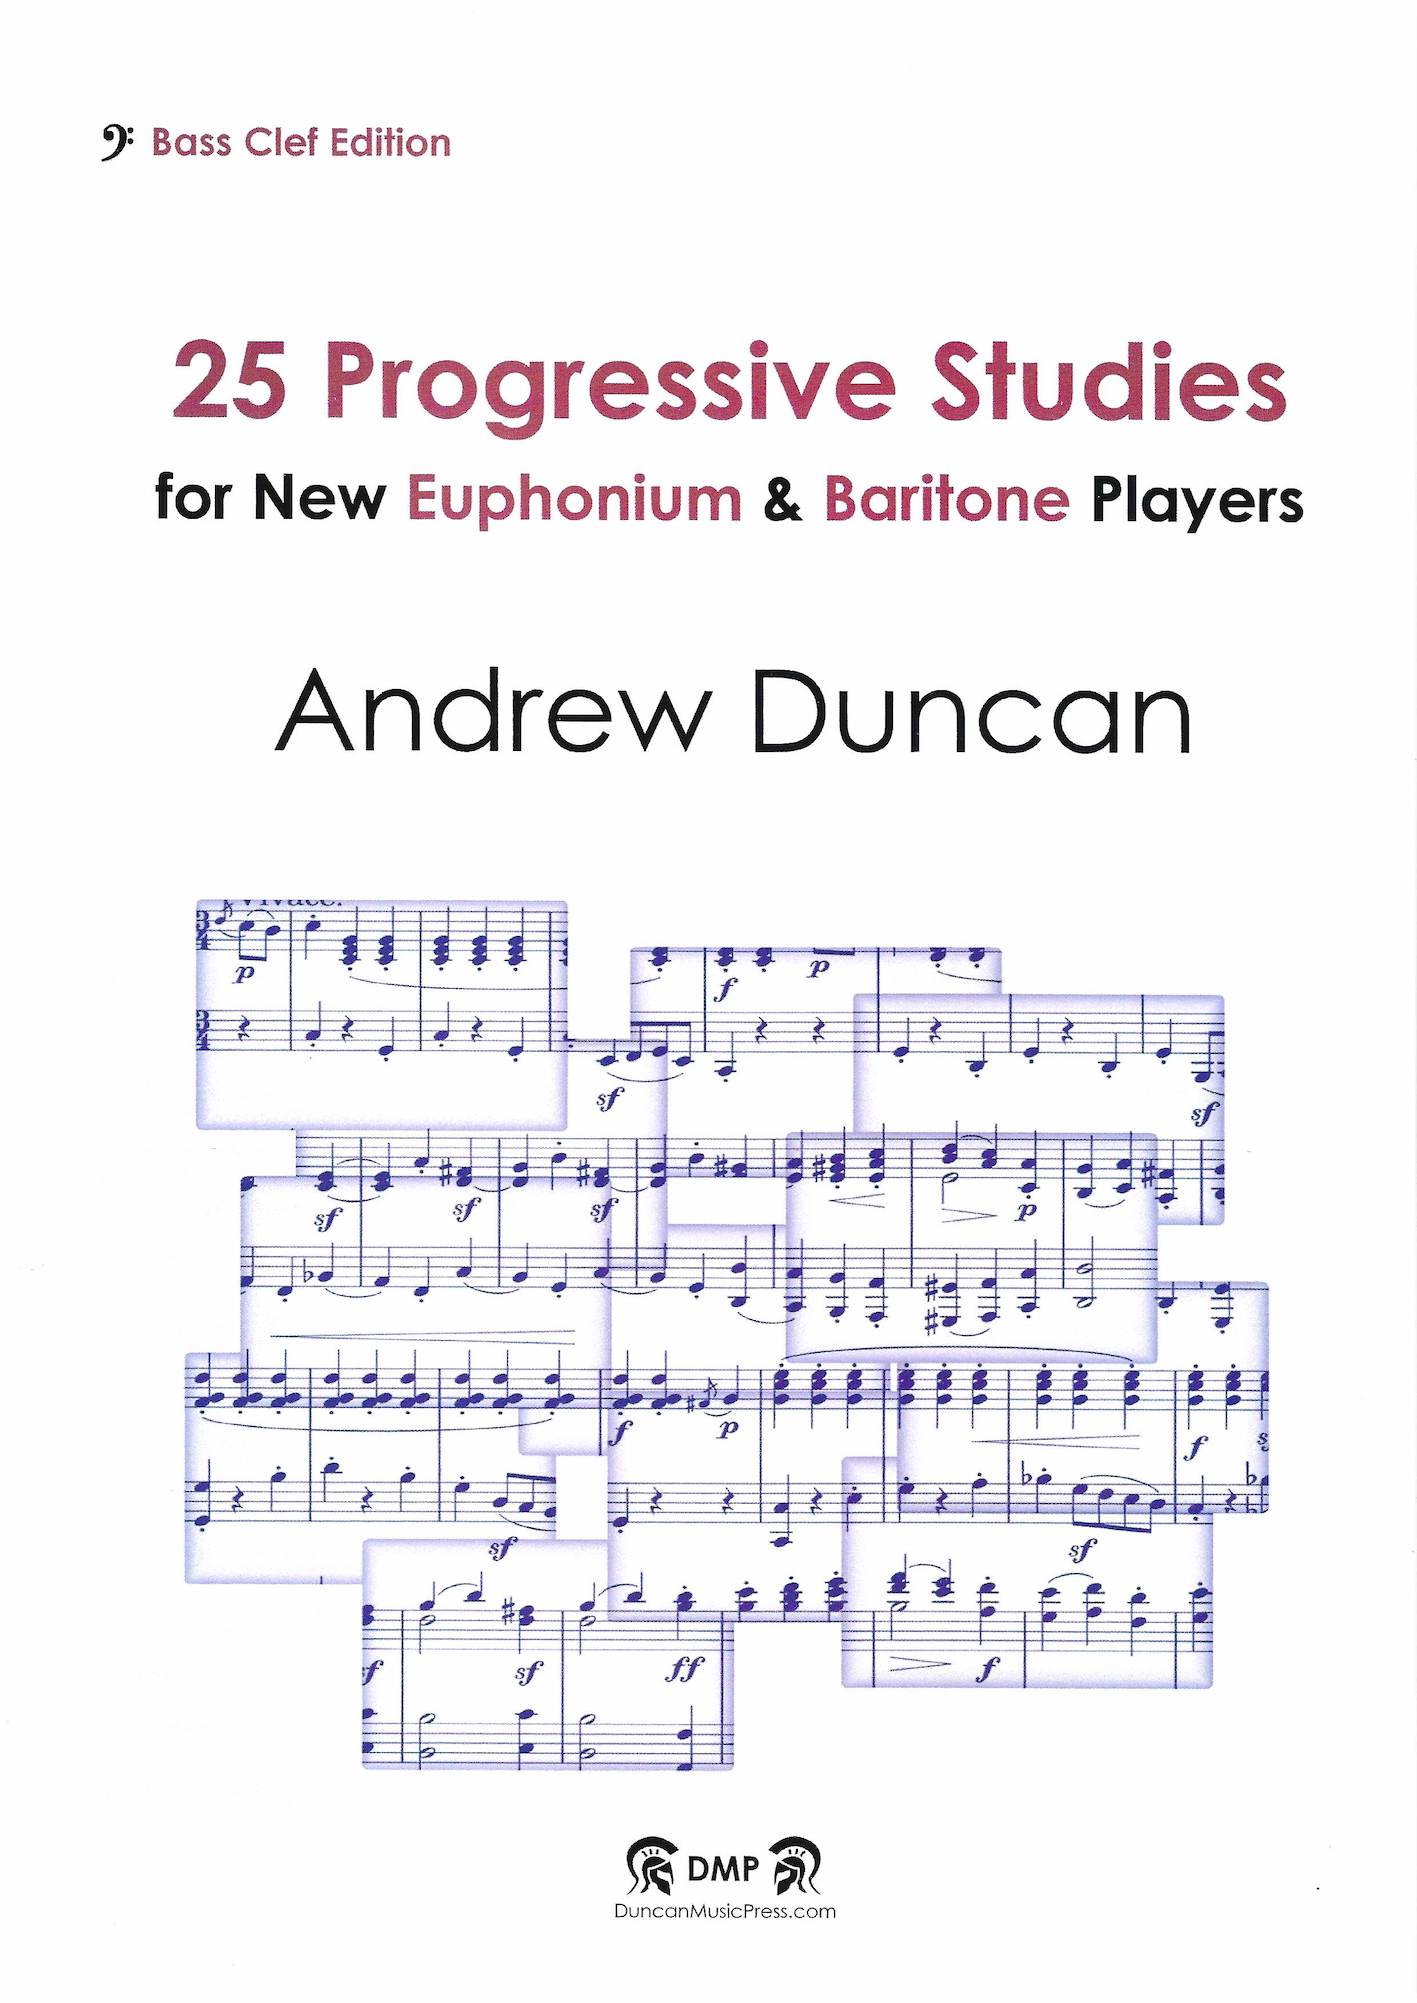 25 Progressive Studies for Euph and Baritone - Bass clef - Andrew Duncan